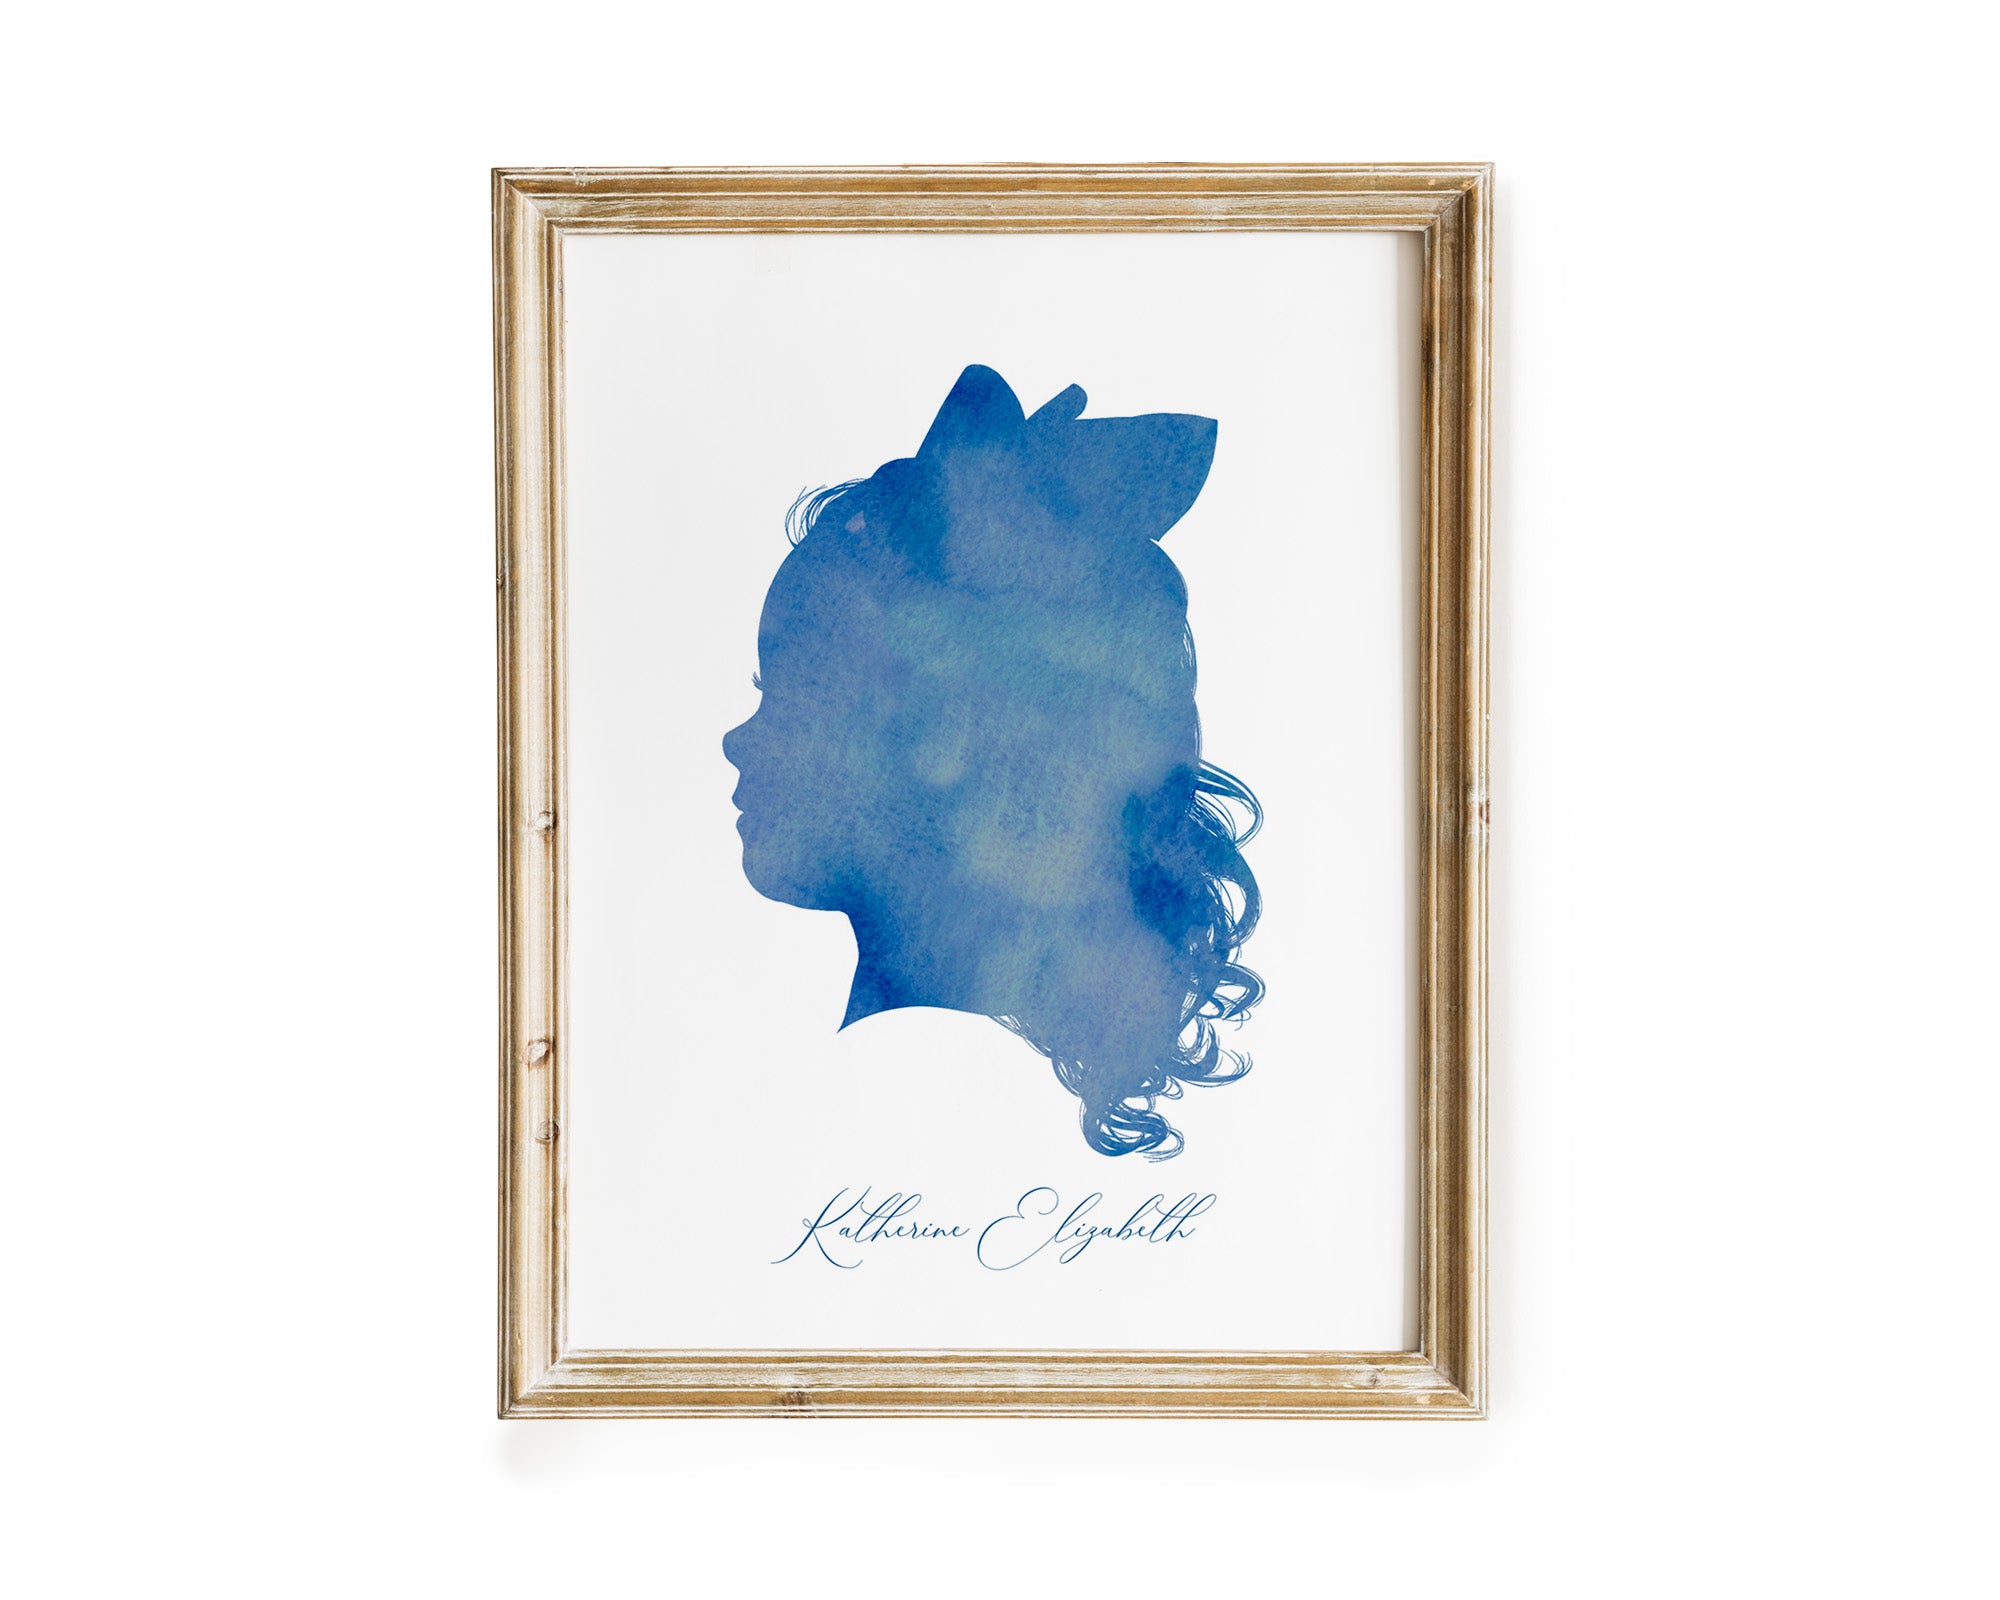 Watercolor silhouette portrait of a young girl with long curly hair